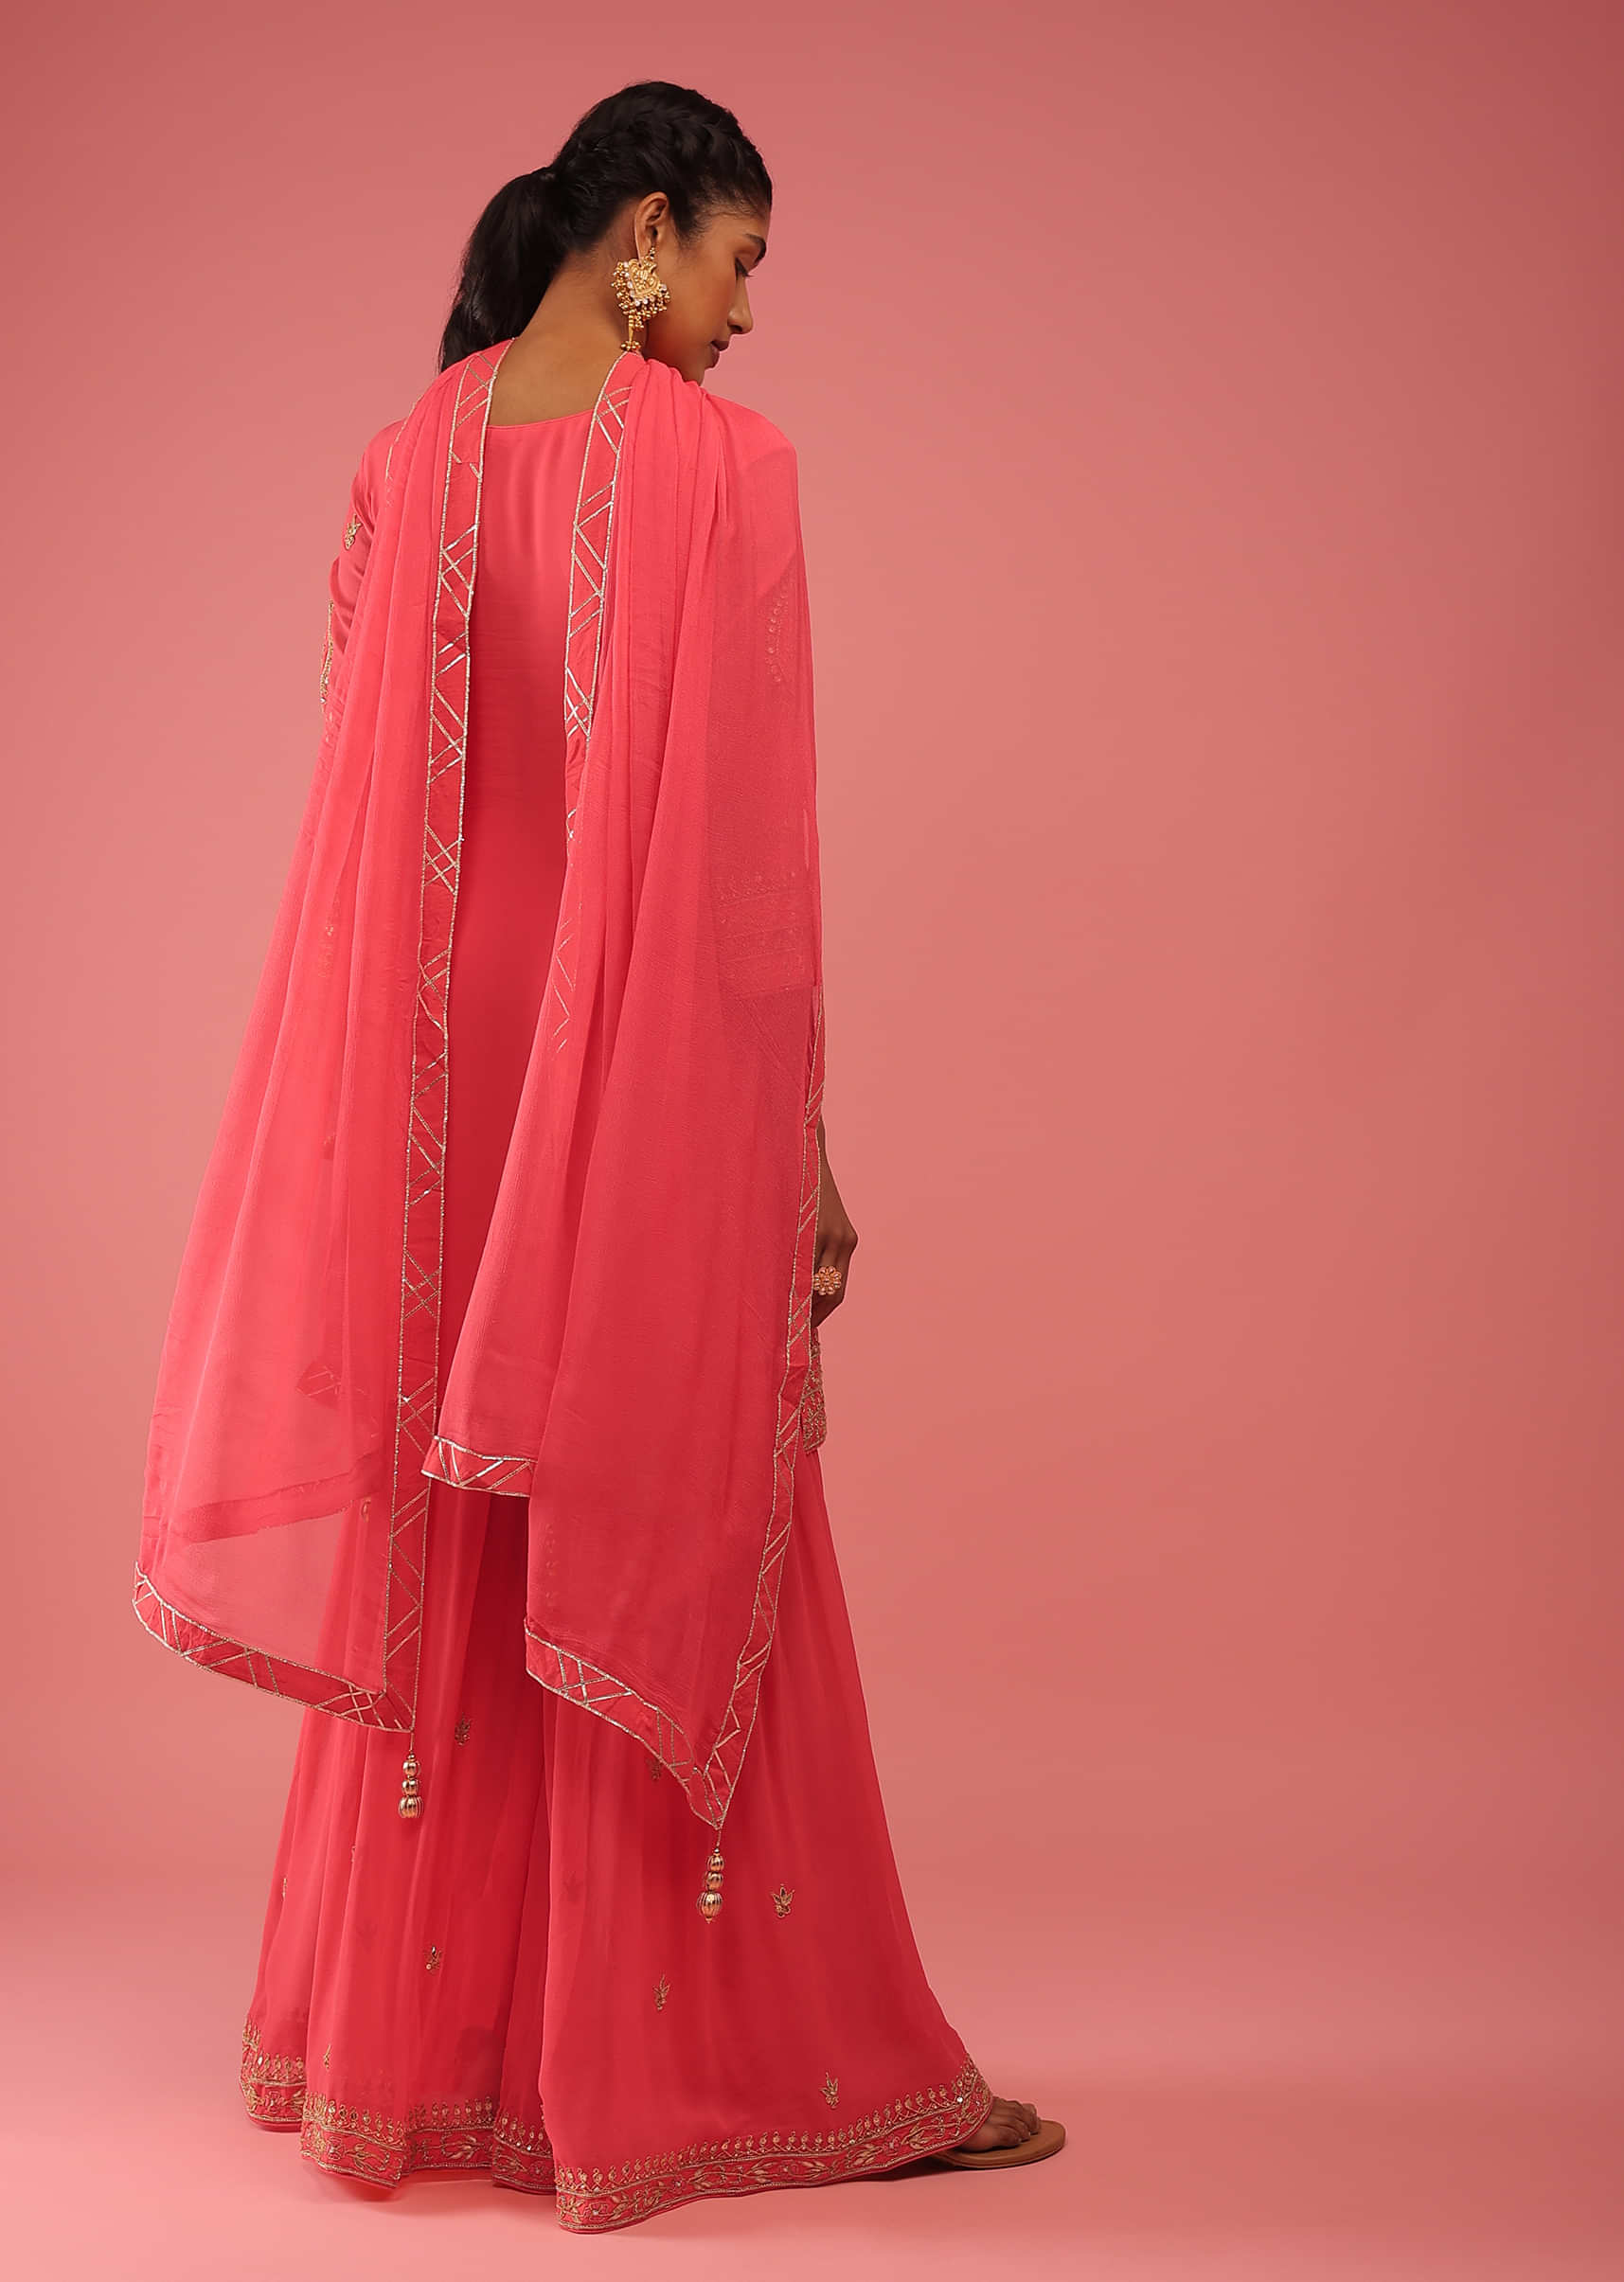 Peach Sharara Pants In Golden Zari And Gotta Patti Embroidery, Crafted In Georgette With Lacework At The Yoke